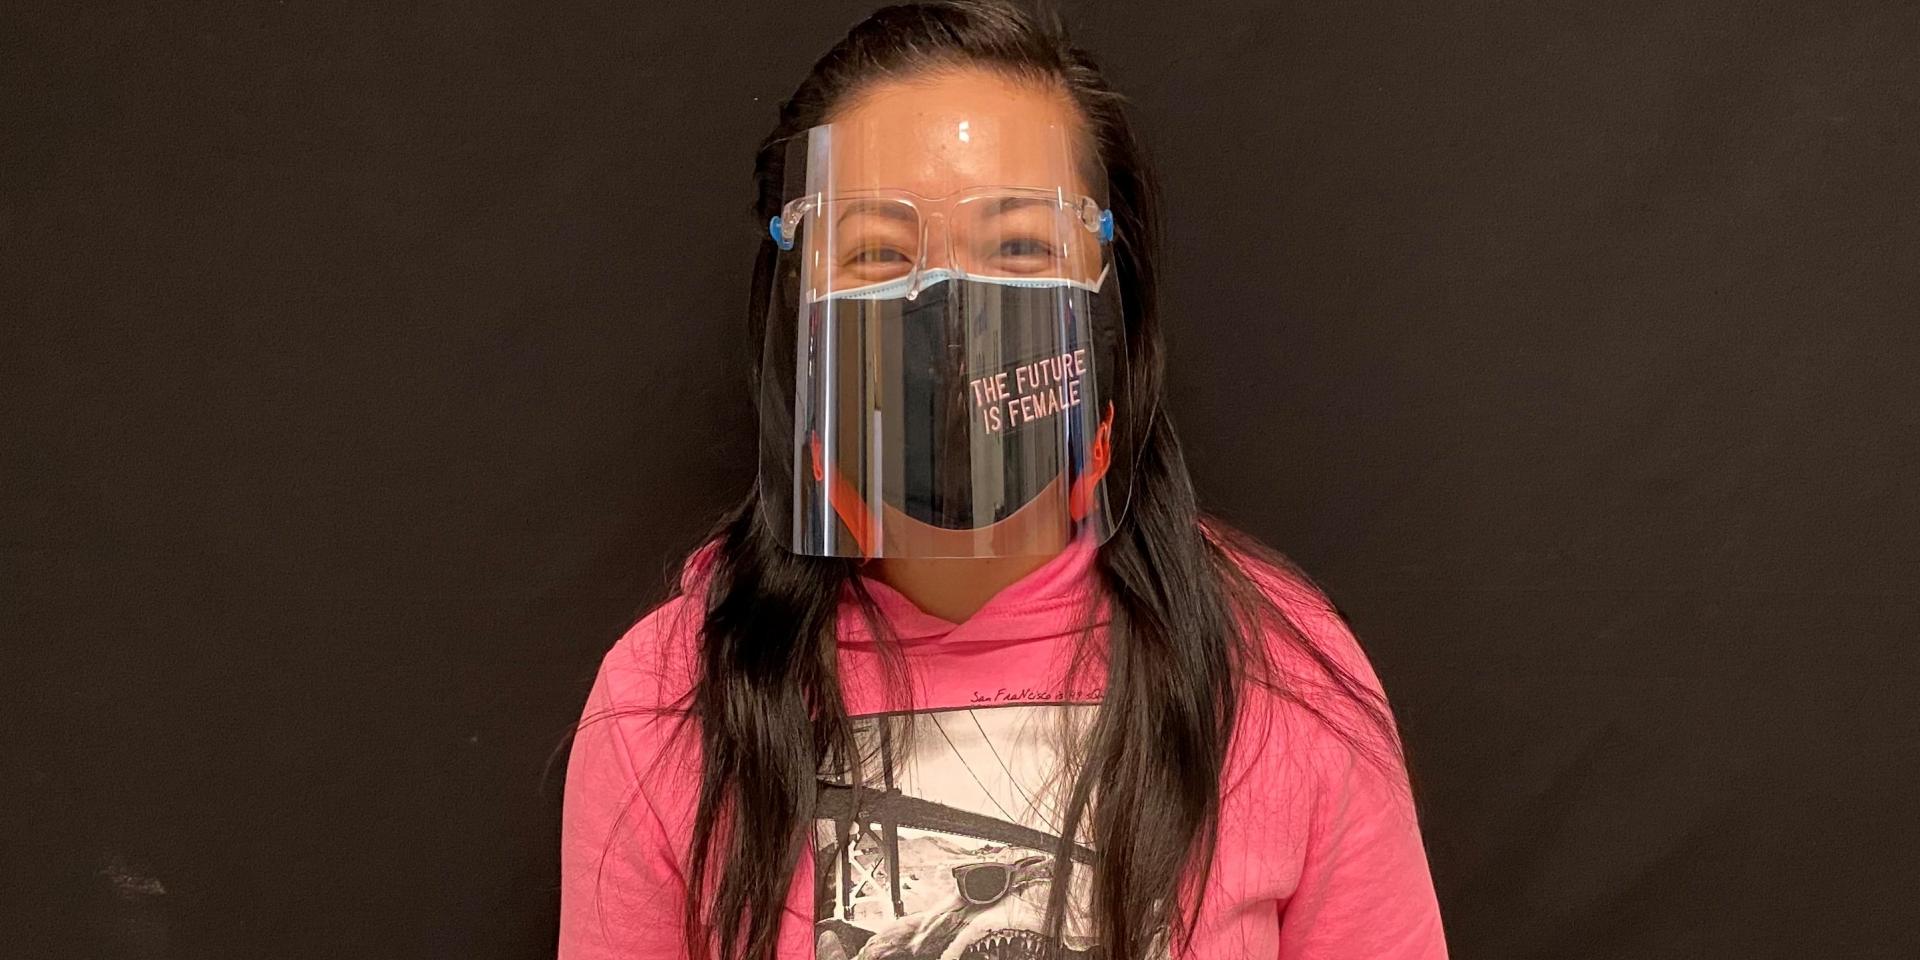 Lisa Tsue, an educator at Grenoble Public School, is photographed wearing a mask and face shield.